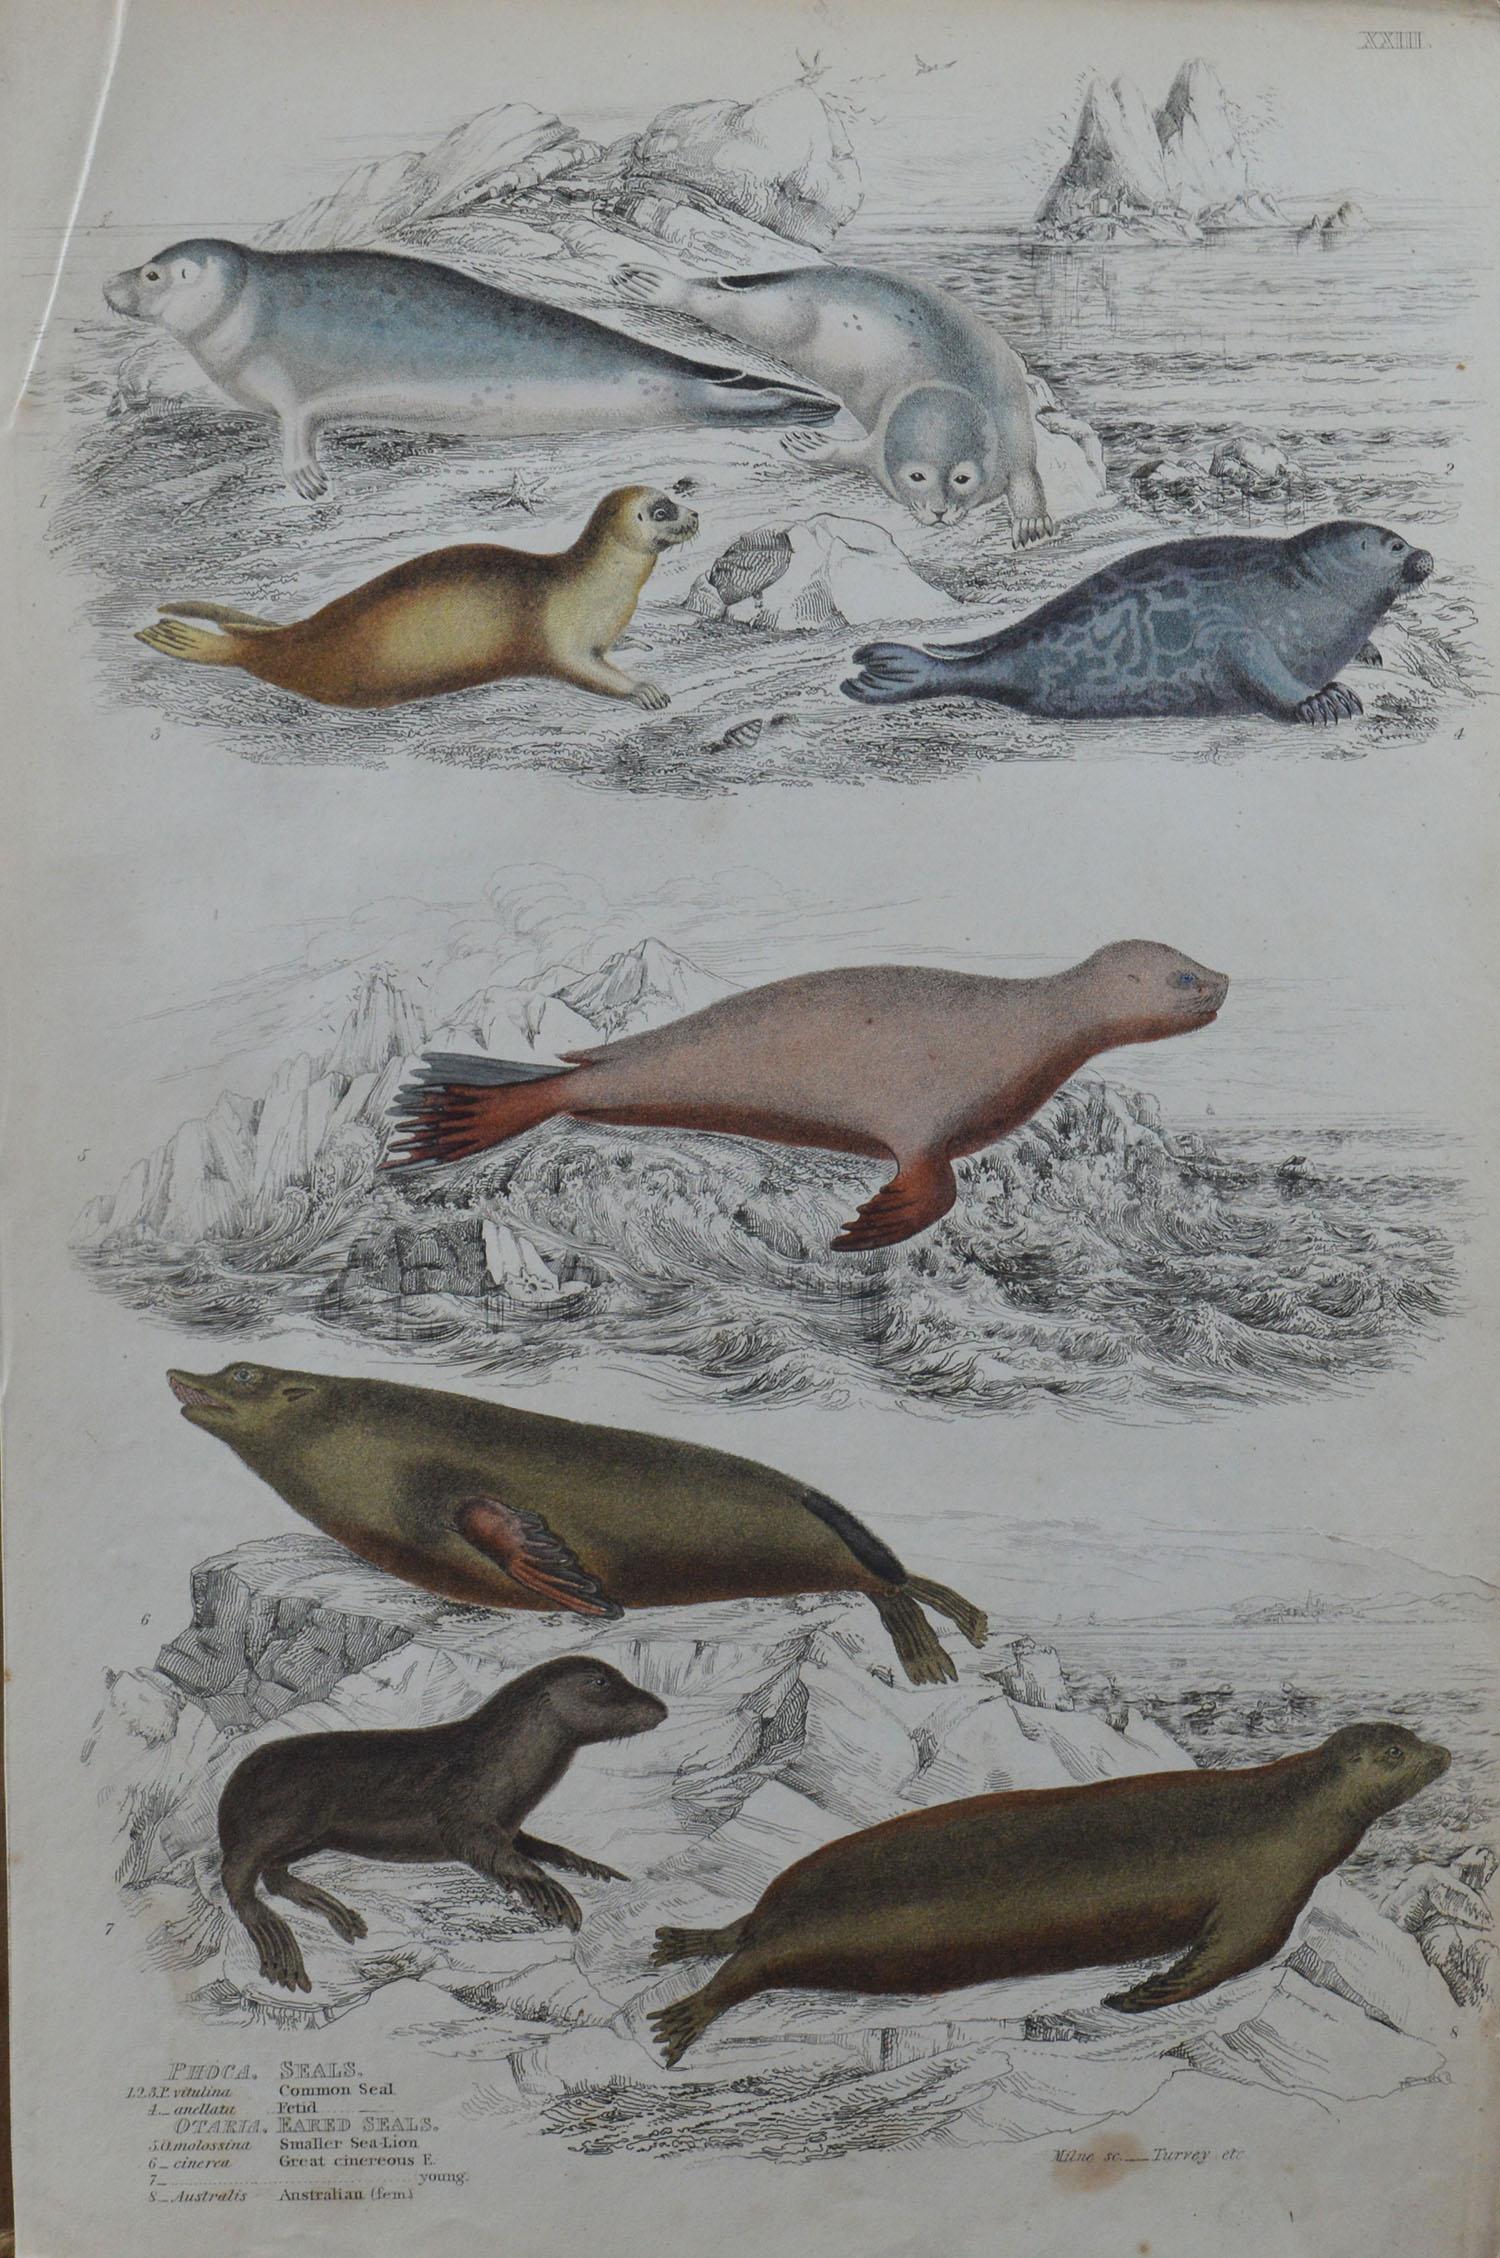 Mid-19th Century Set of 5 Large Original Antique Prints with a Marine, Seaside Theme, 1830s